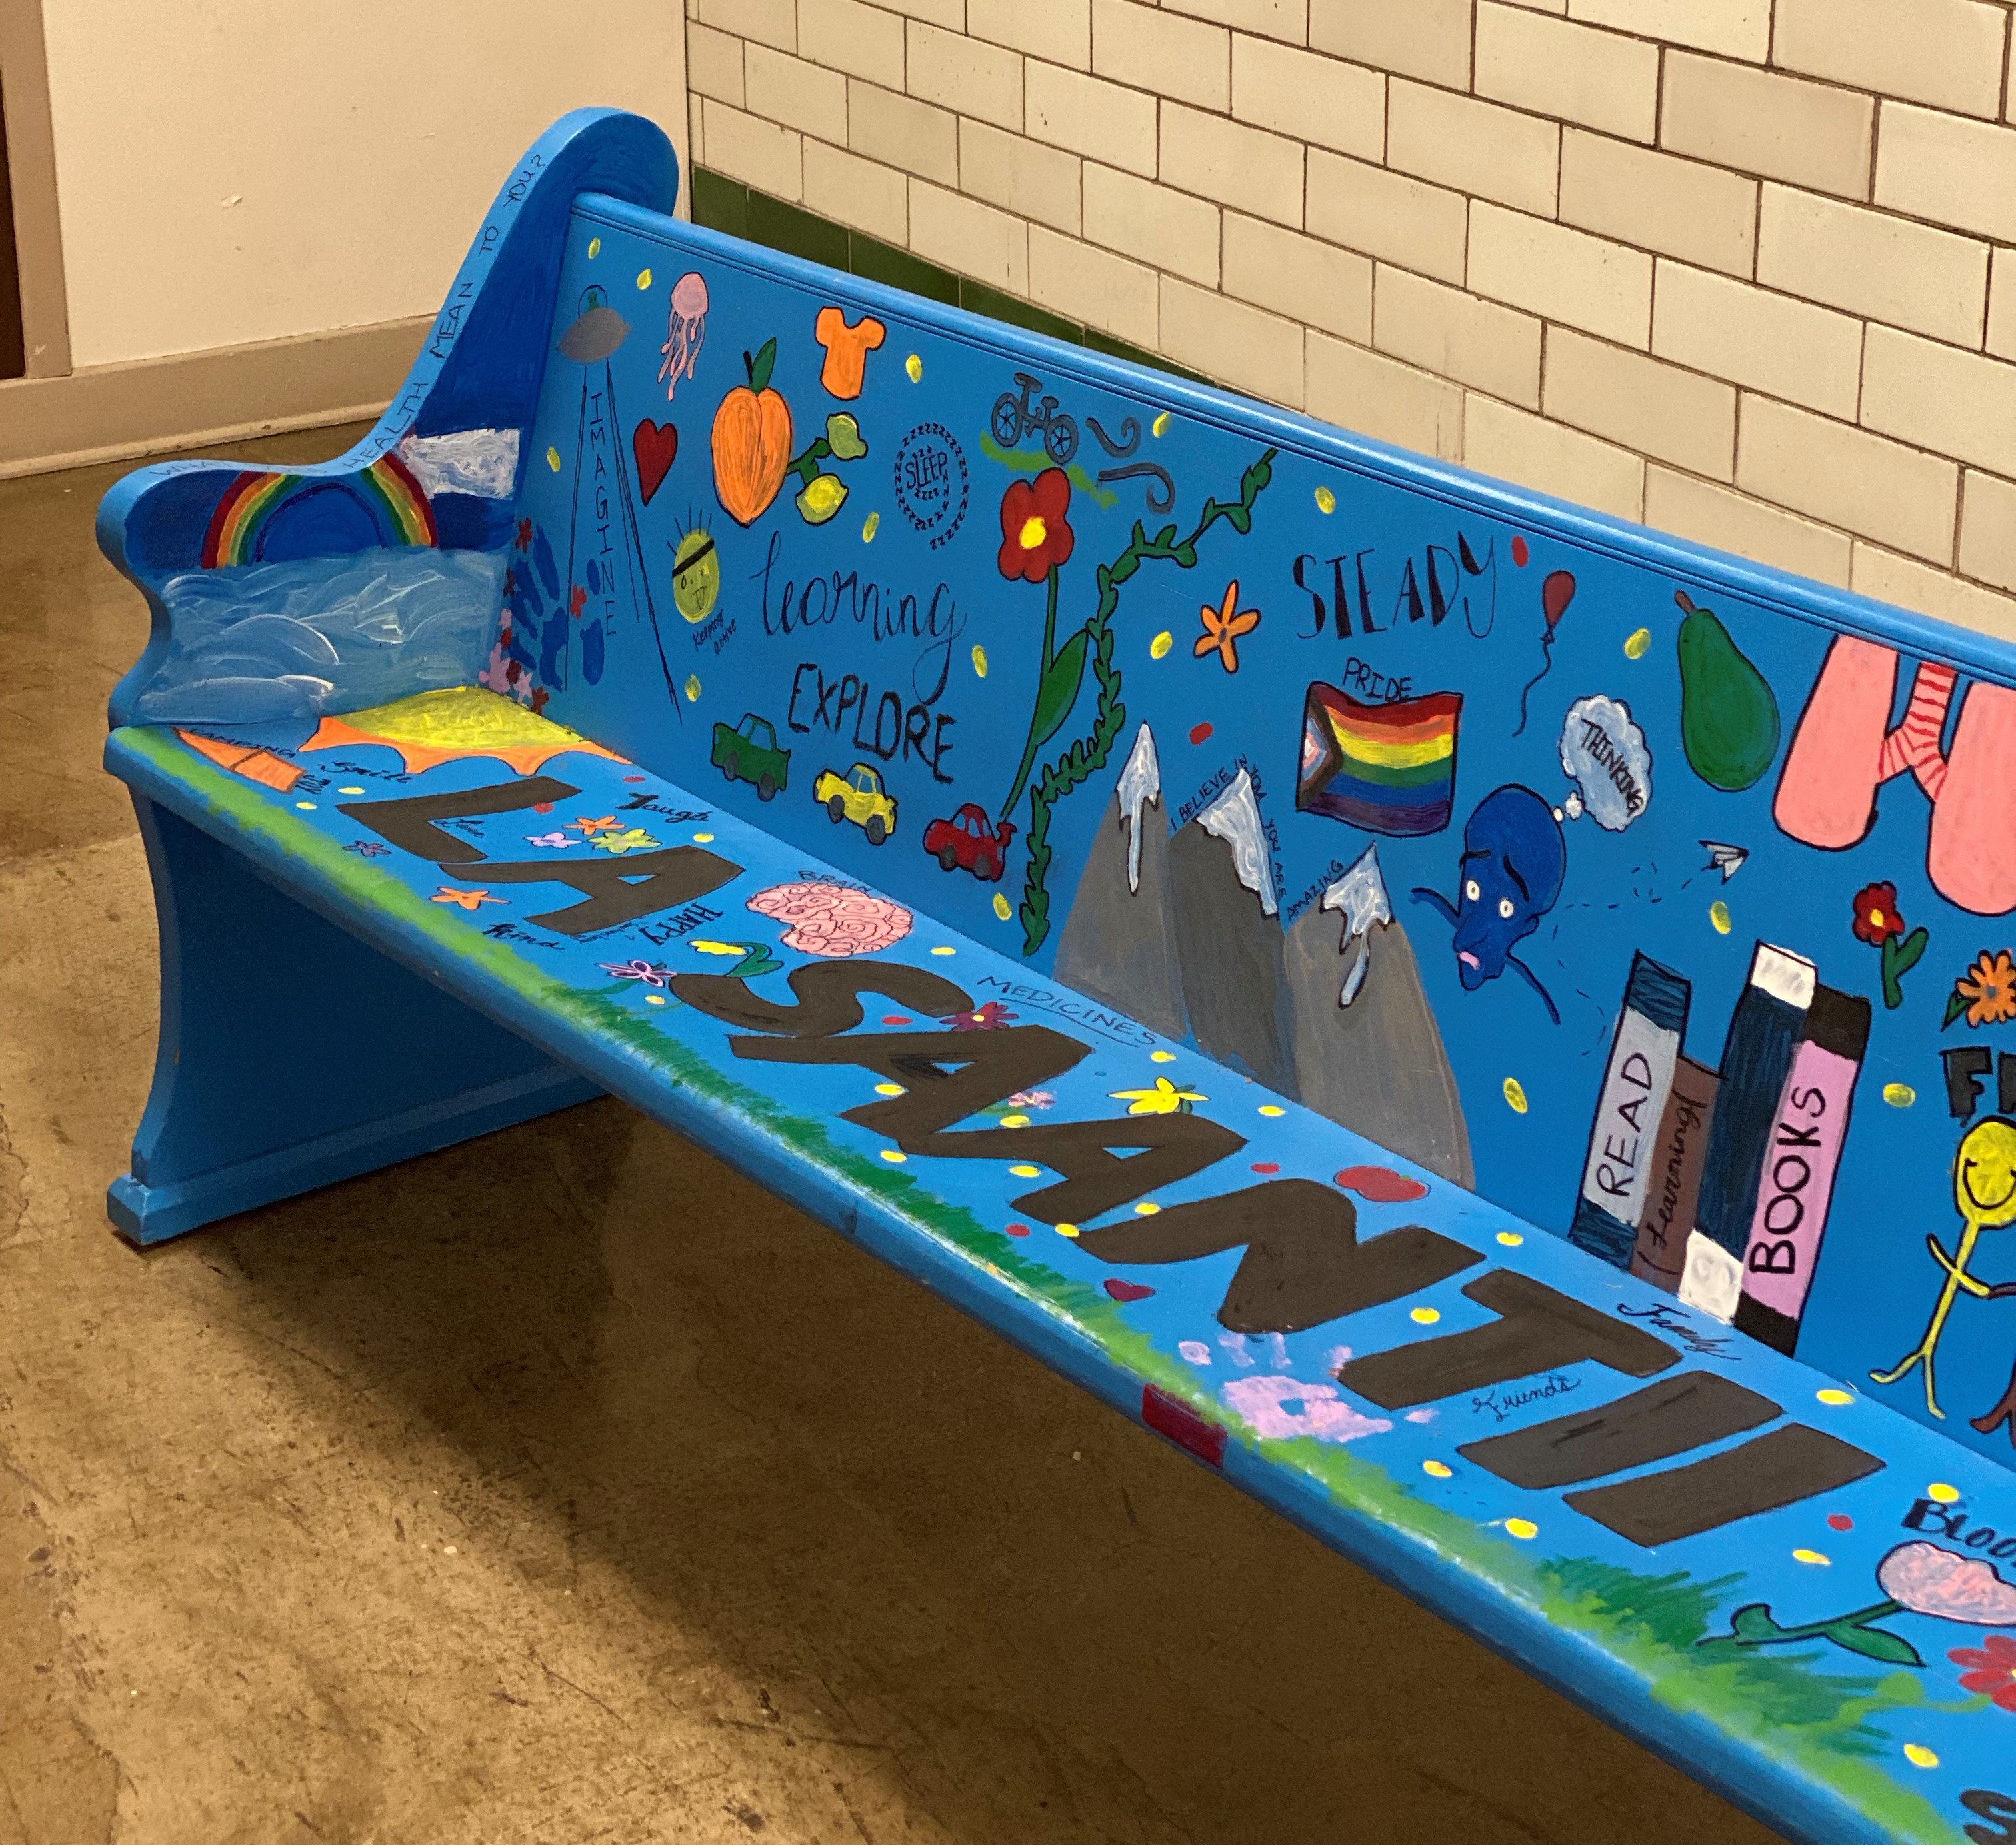 Westmount Wellness Bench. Submitted by Kayla Cropper.